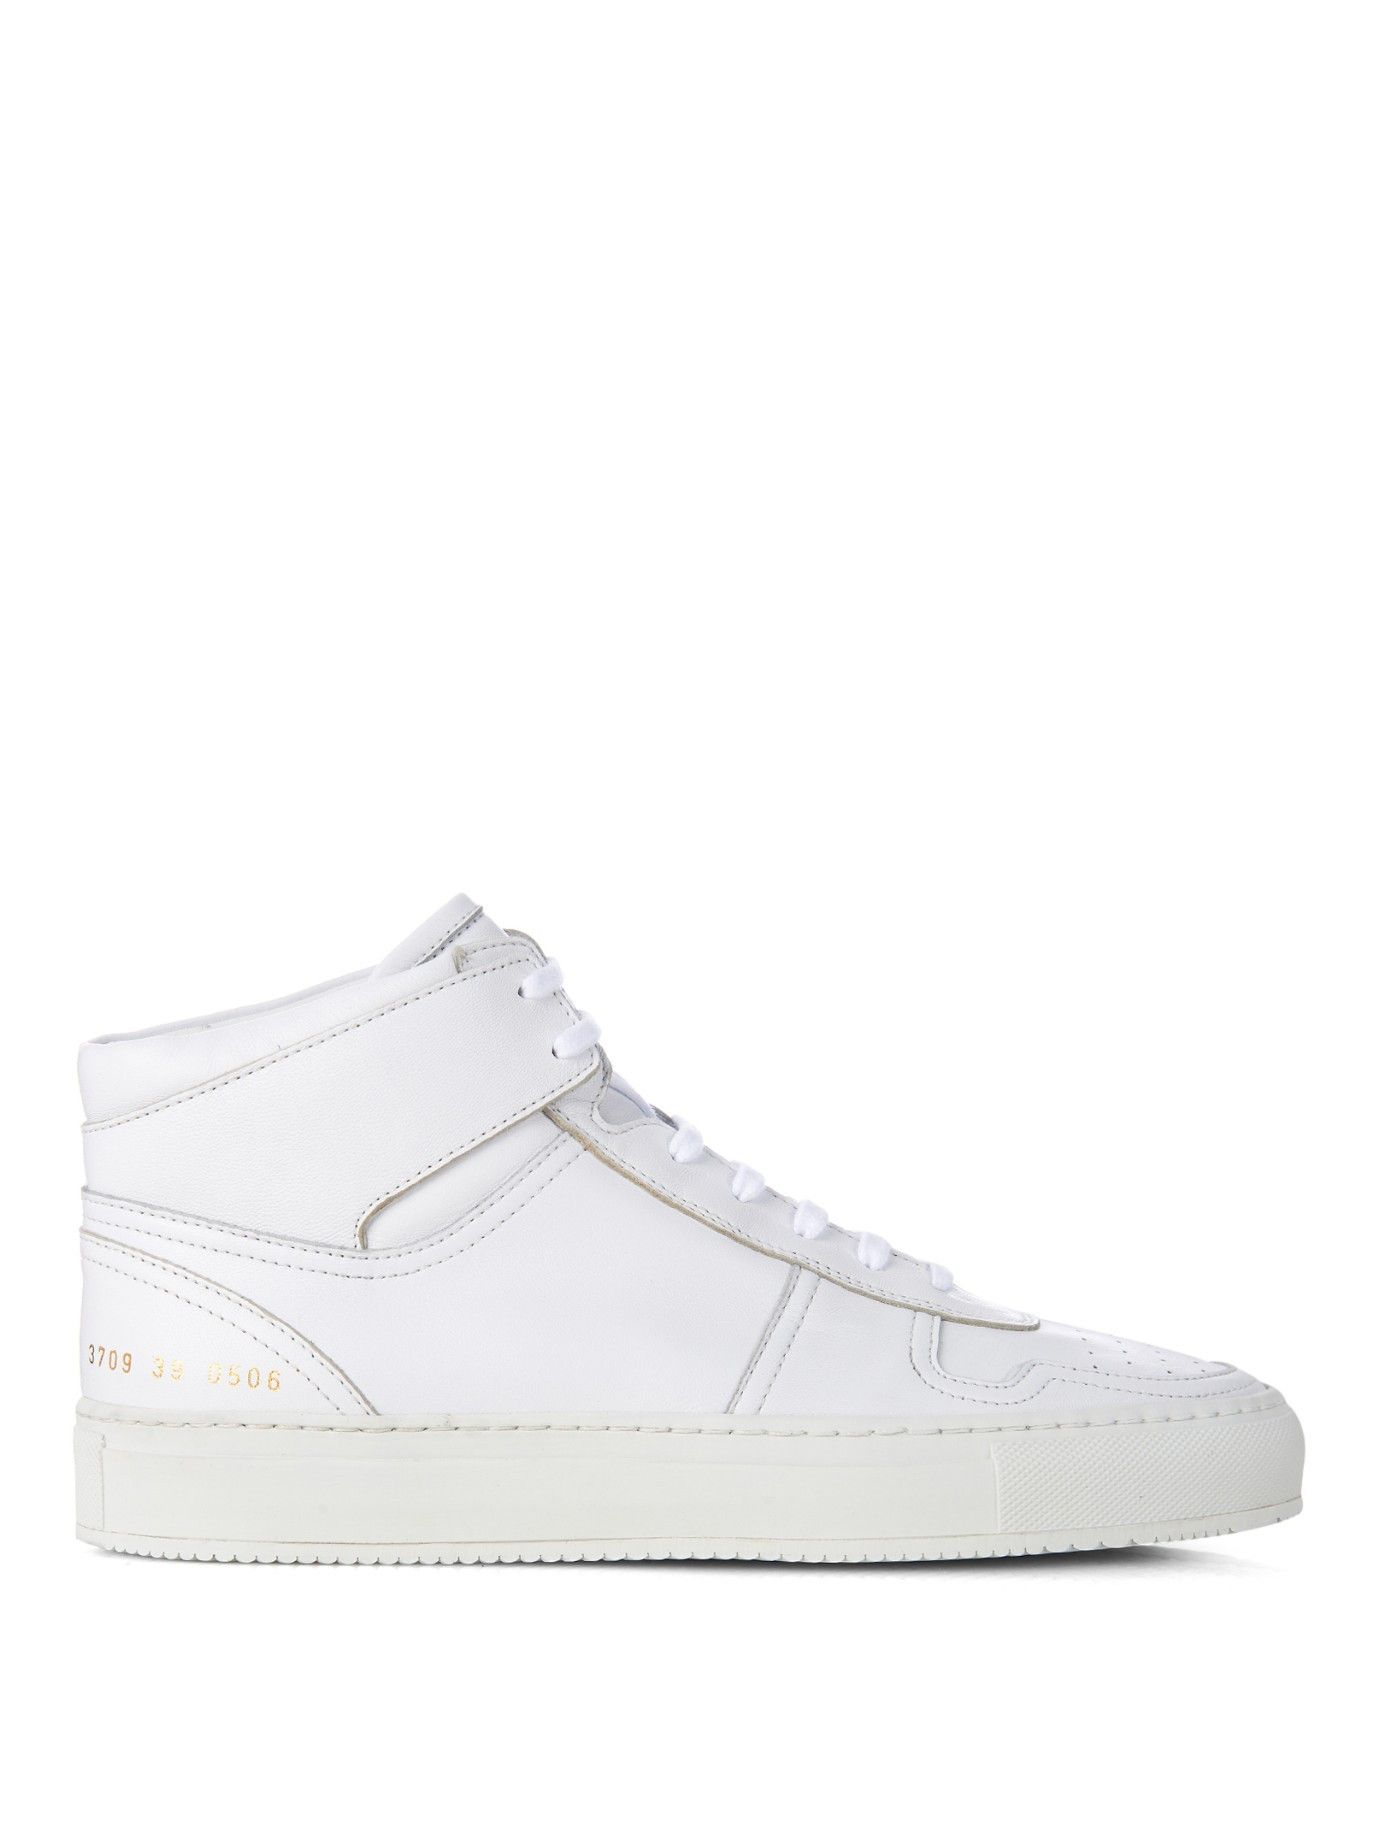 Common Projects Bball Leather High-top Trainer | Woman | Grailed